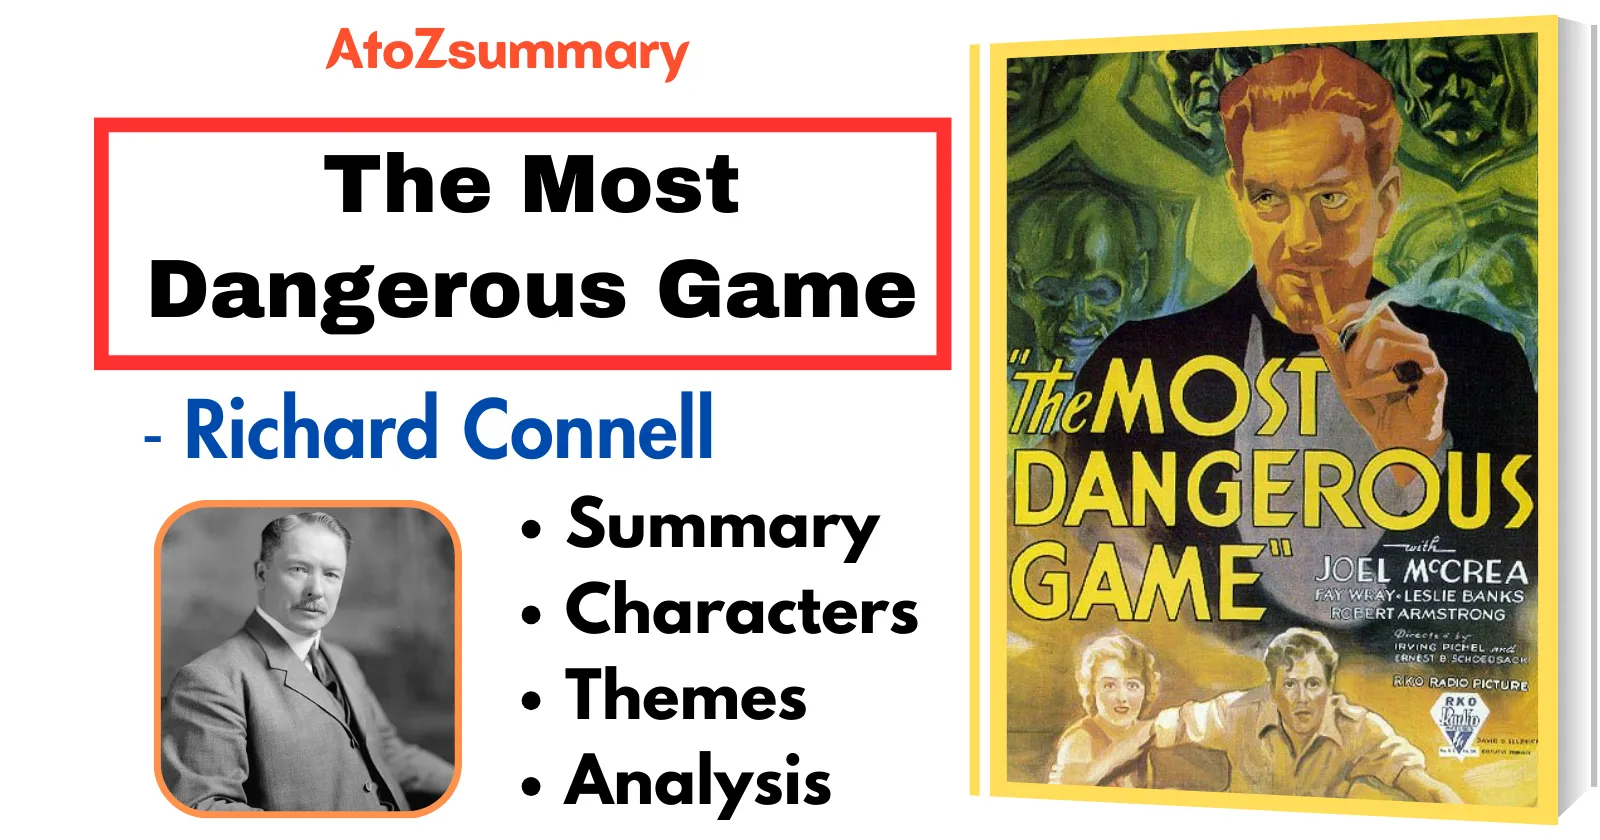 The Most Dangerous Game Summary